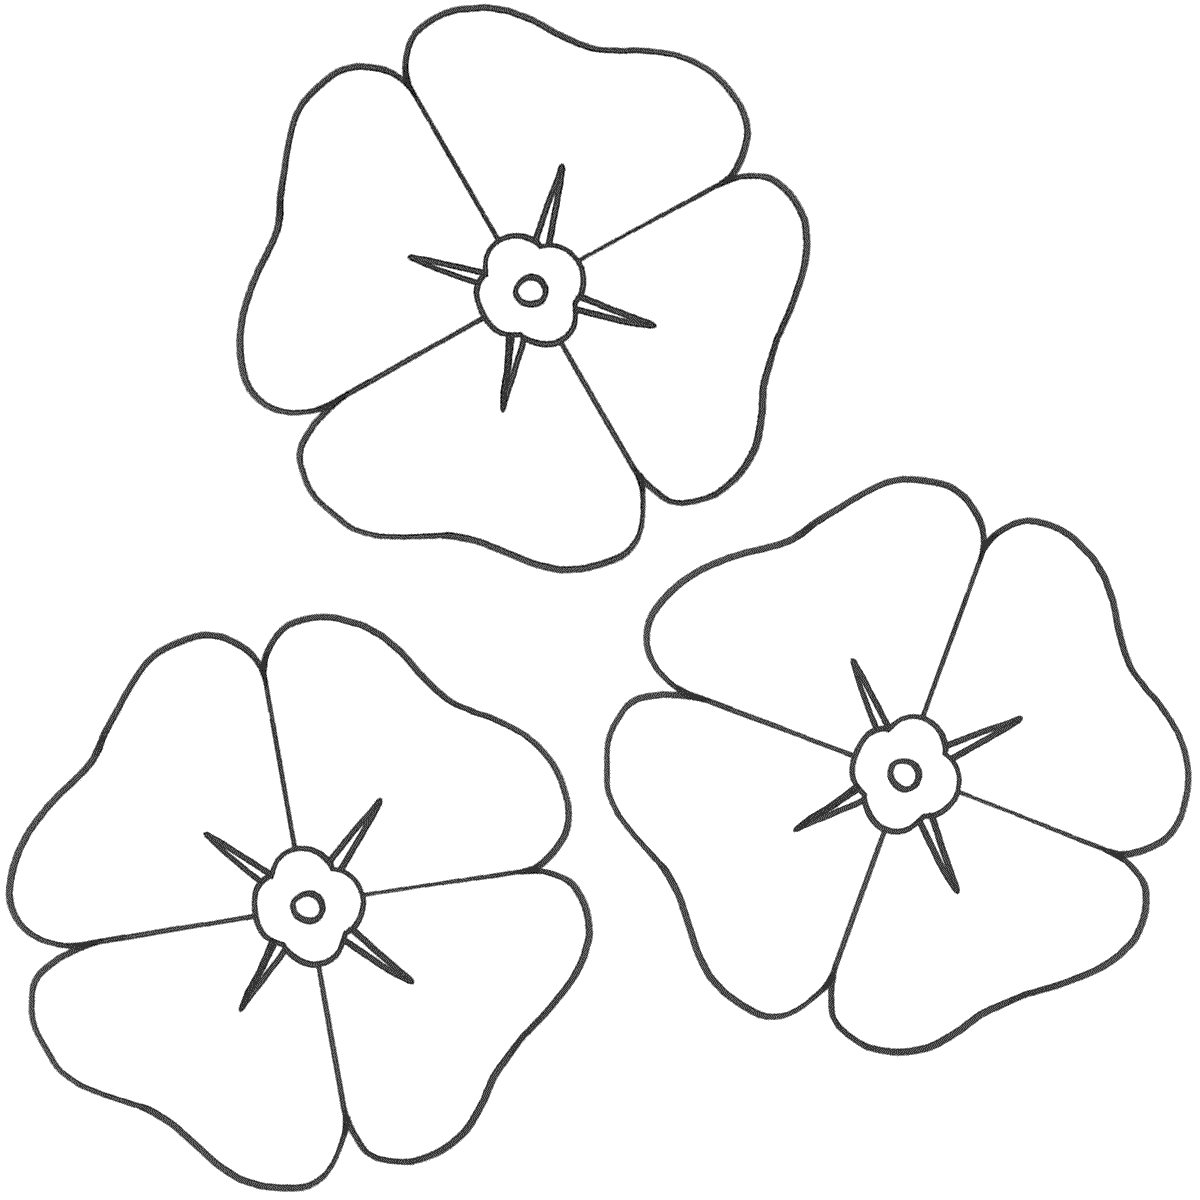 free-poppy-download-free-poppy-png-images-free-cliparts-on-clipart